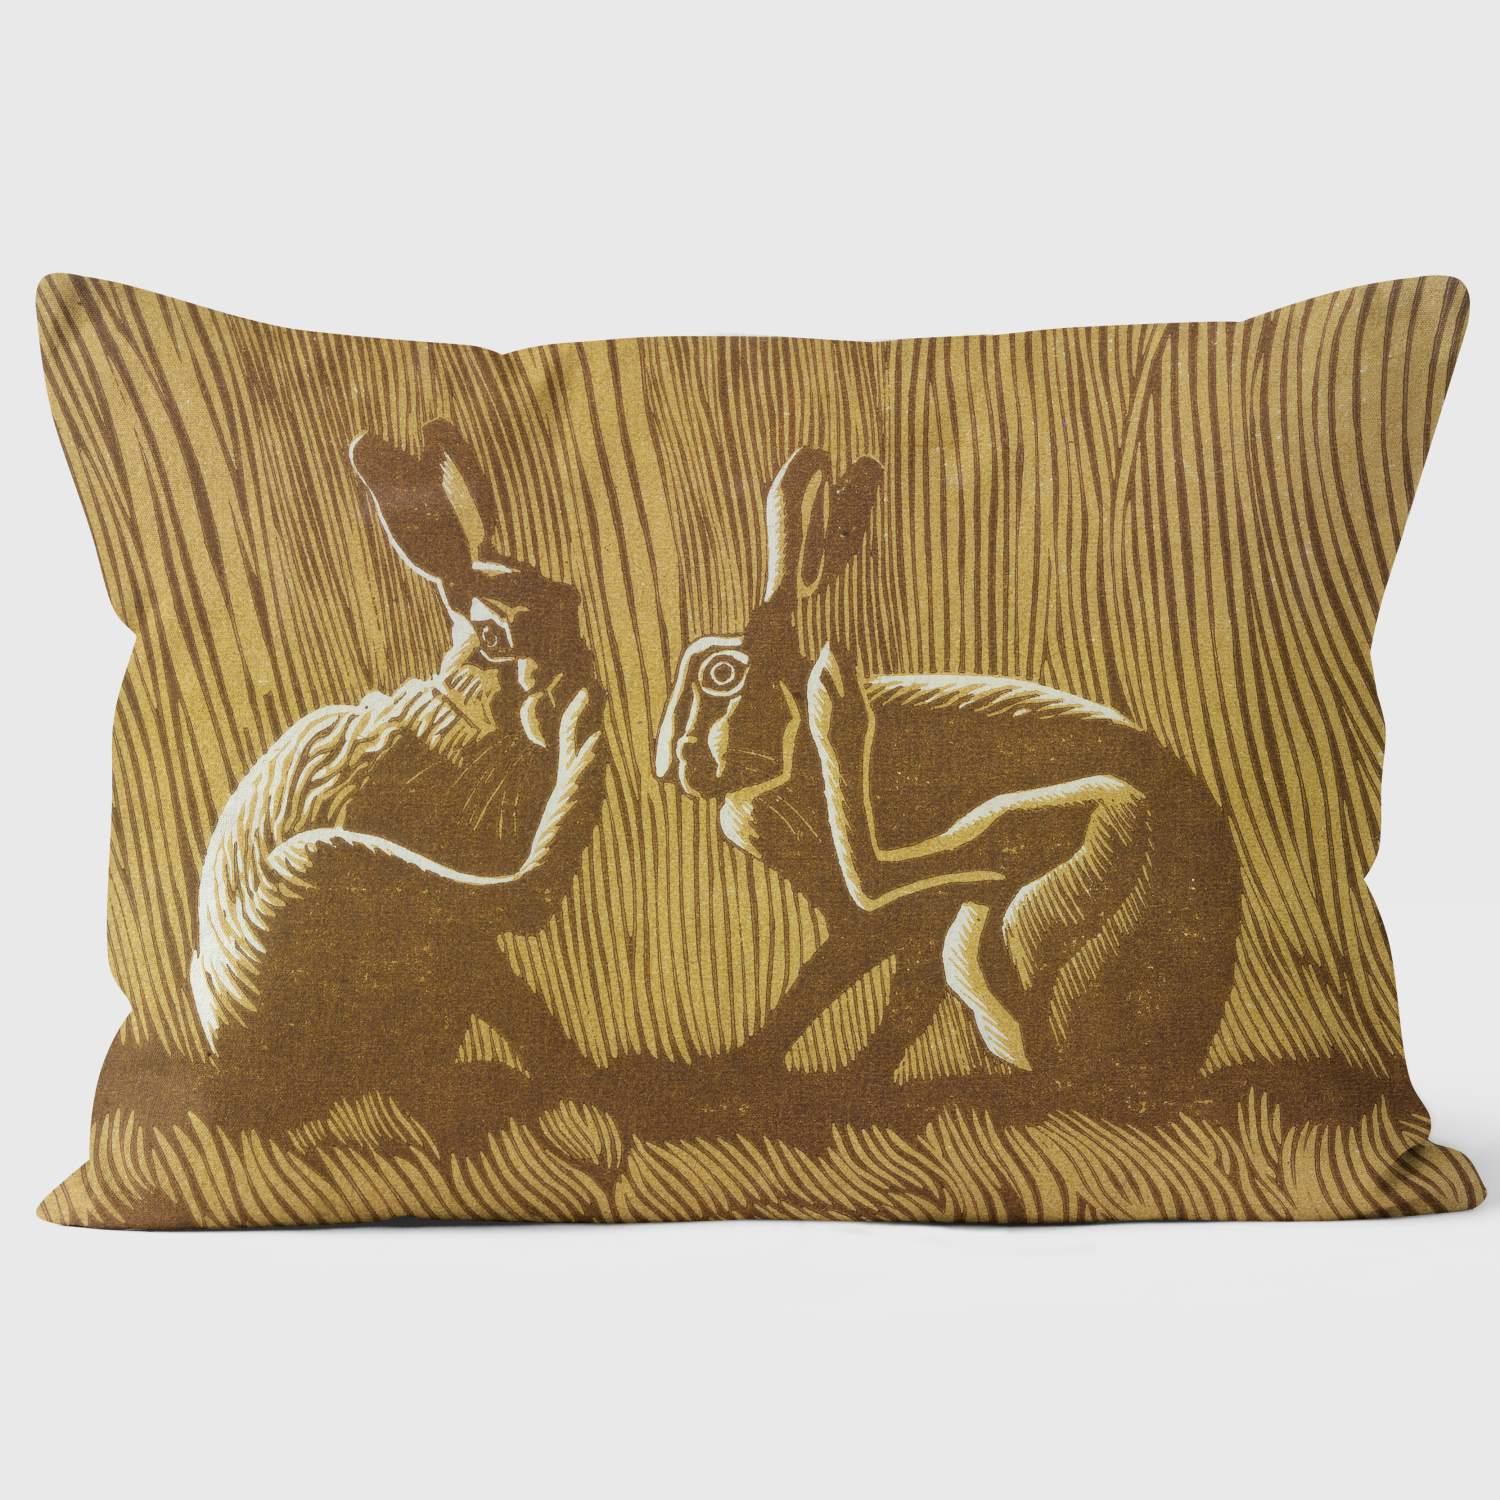 Two Hares 'Up To Scratch' - Robert Gillmor Cushion - Handmade Cushions UK - WeLoveCushions